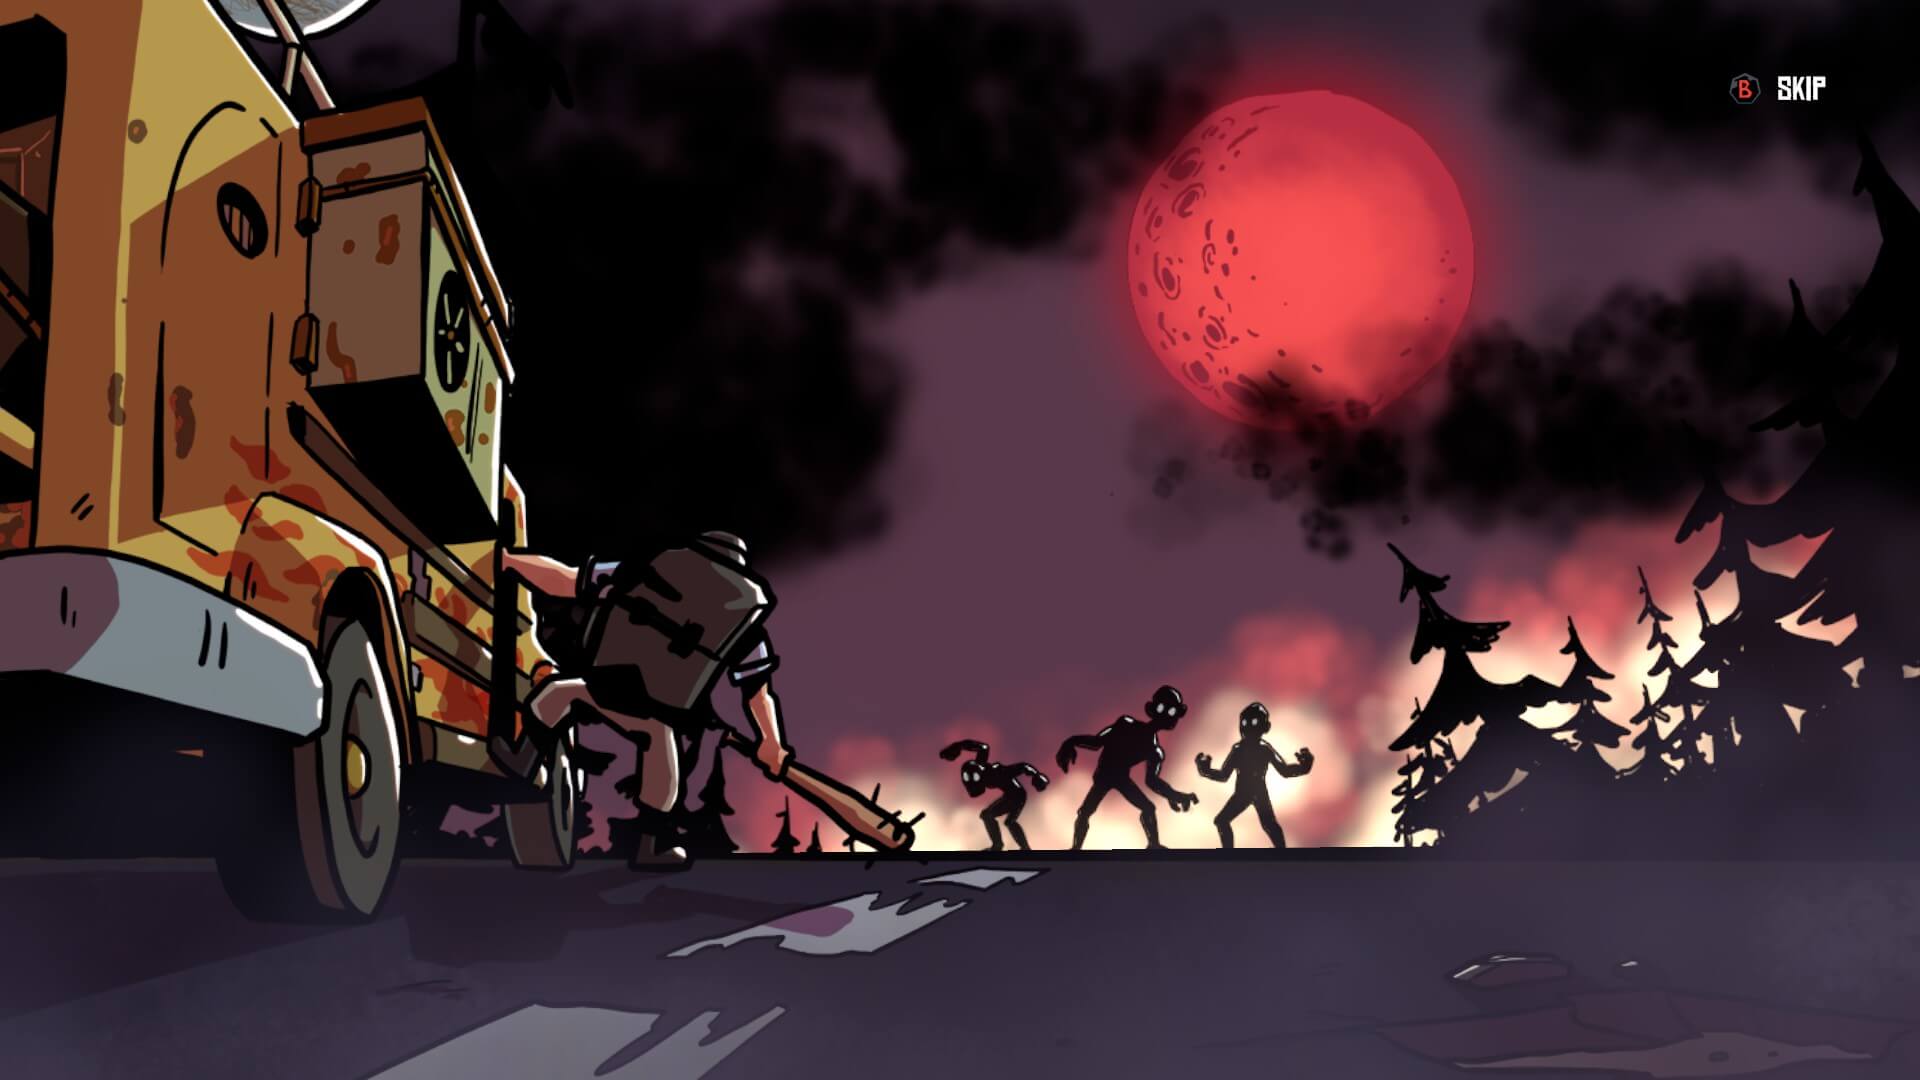 A screenshot I snagged when the beginning intro was playing. it shows the Fighter leaning out the door of the bus preparing to defend from the threat ahead. The clouds are black and passed them shines a blood moon. The road has three zombies which could be shamblers.